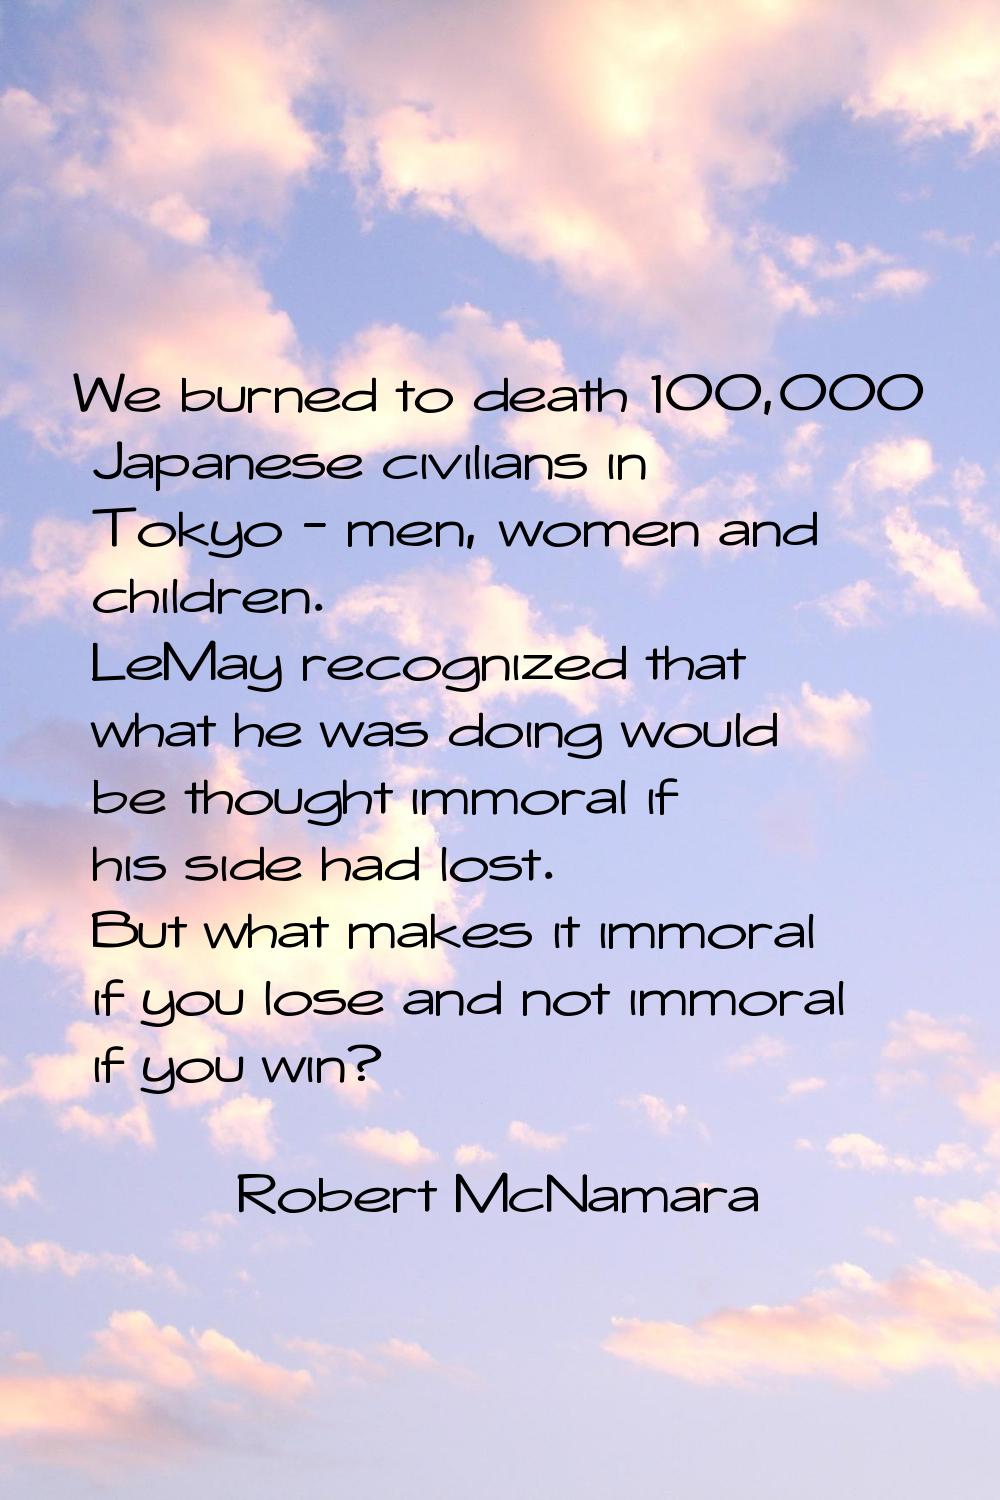 We burned to death 100,000 Japanese civilians in Tokyo - men, women and children. LeMay recognized 